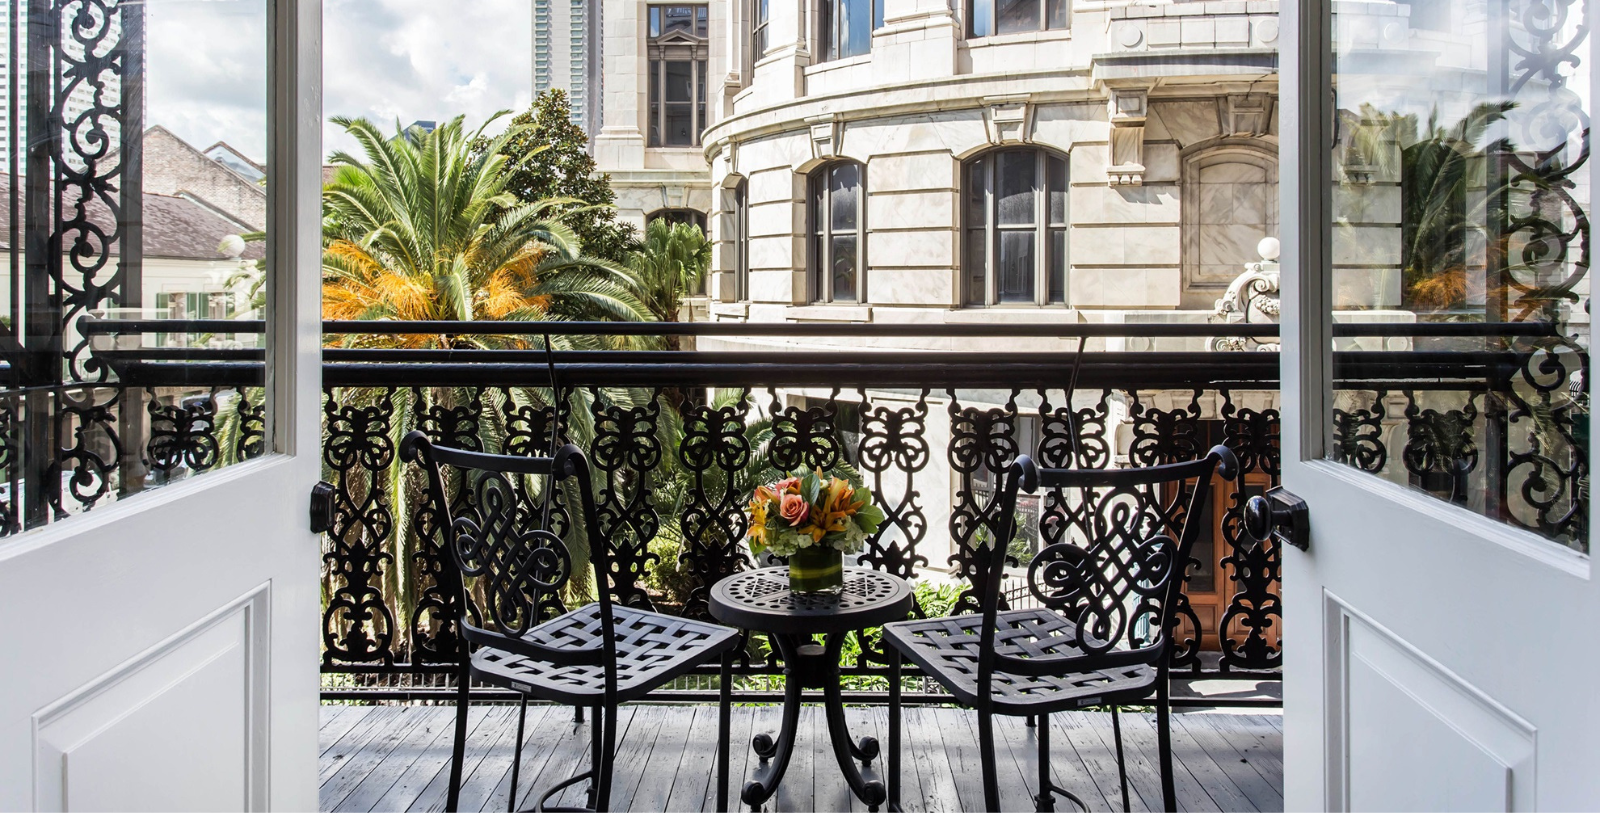 Image of balcony view at Omni Royal Orleans, a member of Historic Hotels of America since 2010, located in New Orleans, Louisiana